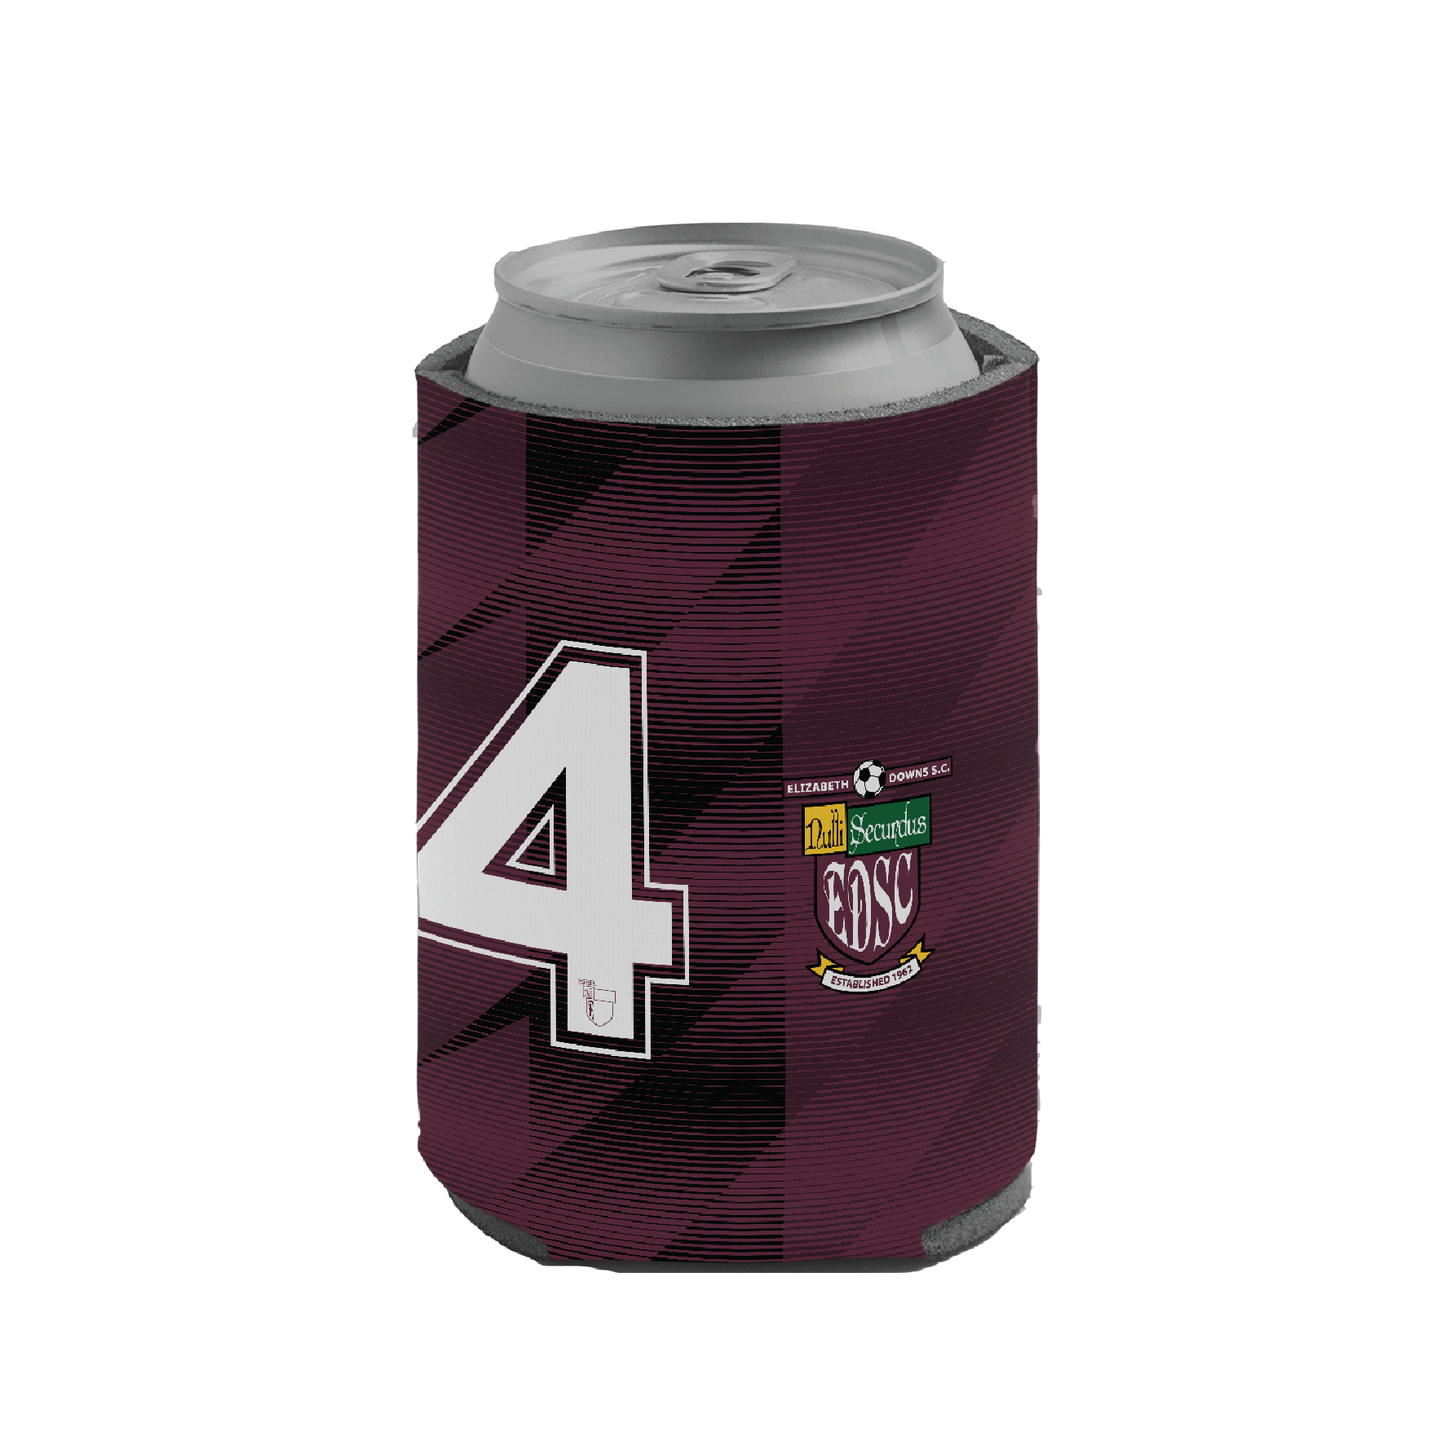 EDSC CAN COOLER AVALIABLE TO PURCHASE FROM CLUB